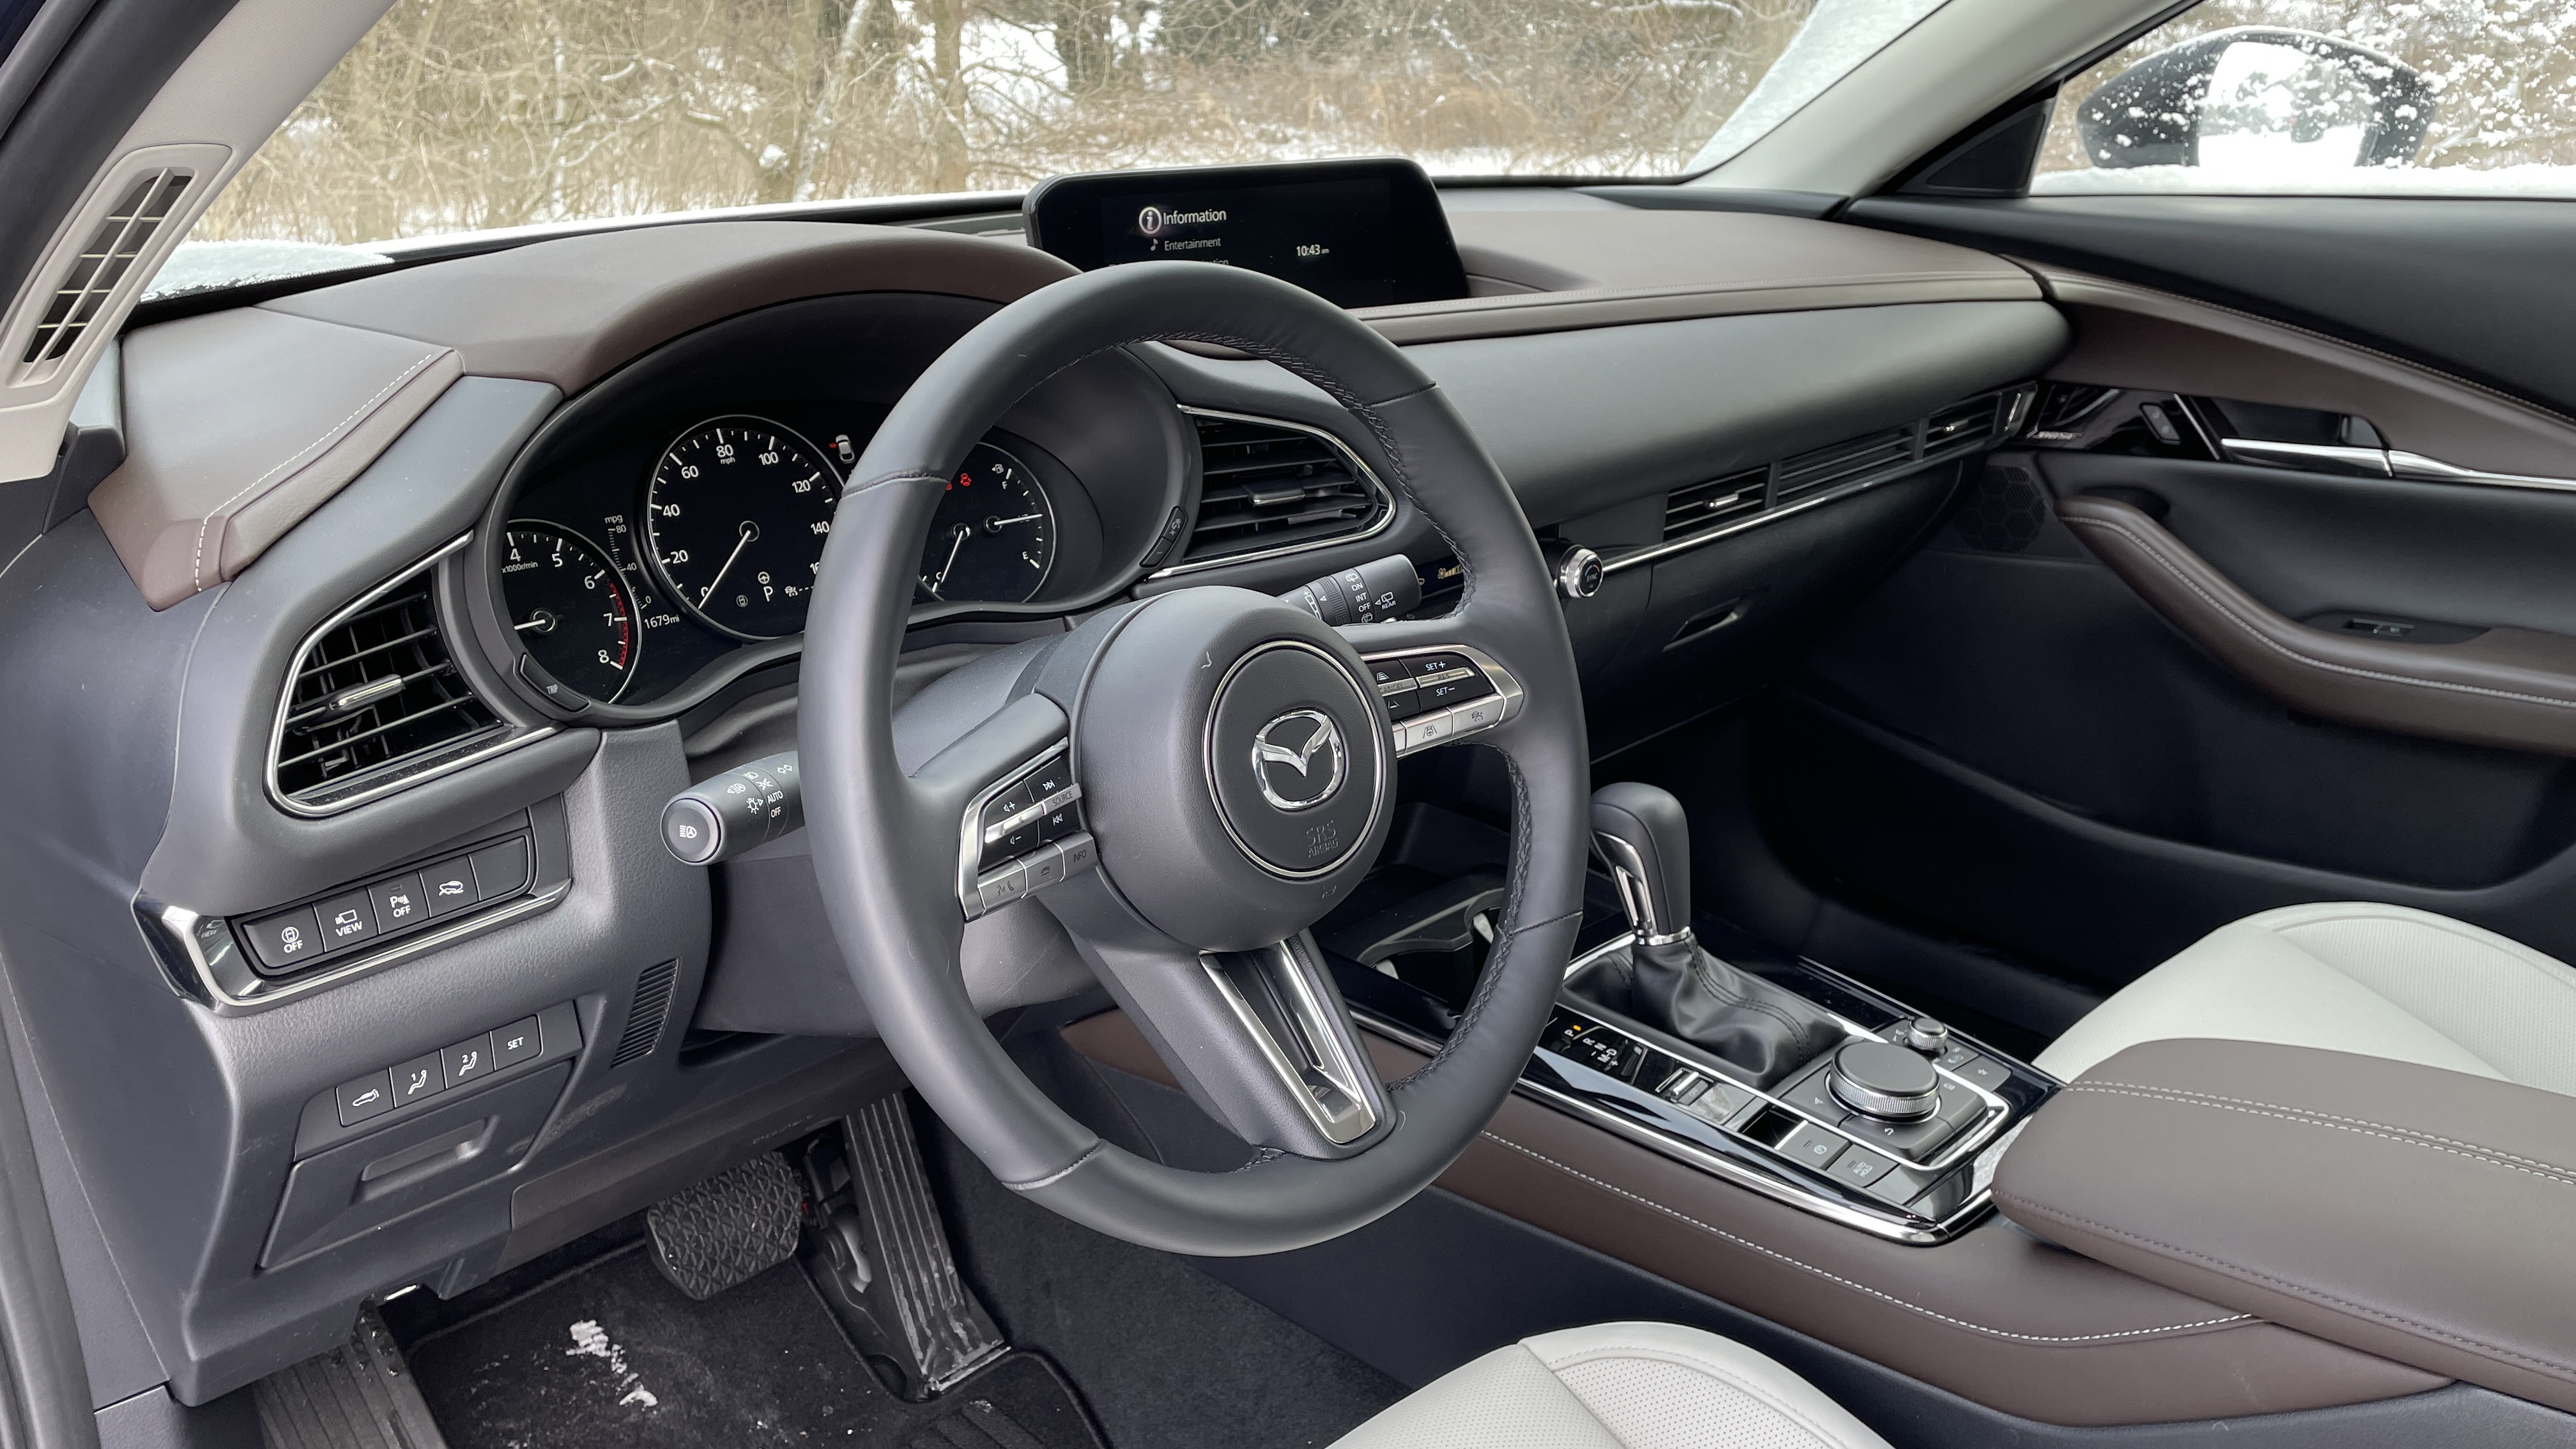 2021 Mazda CX30 Interior Review An affordable, premium heavyweight